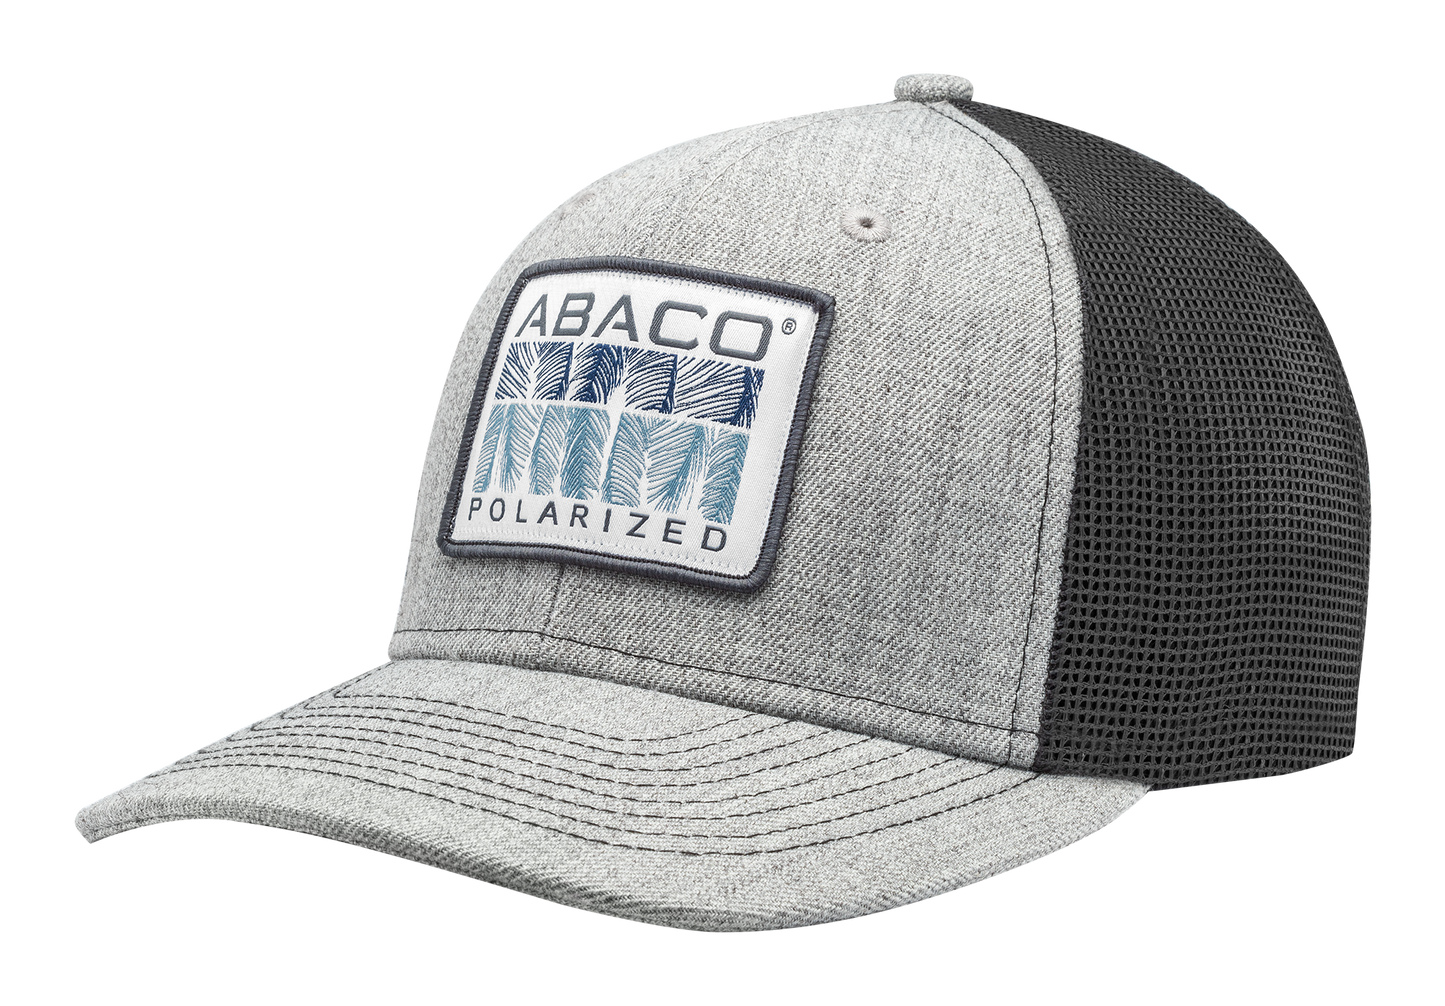 Abaco Polarized Palm Fronds Trucker Hat